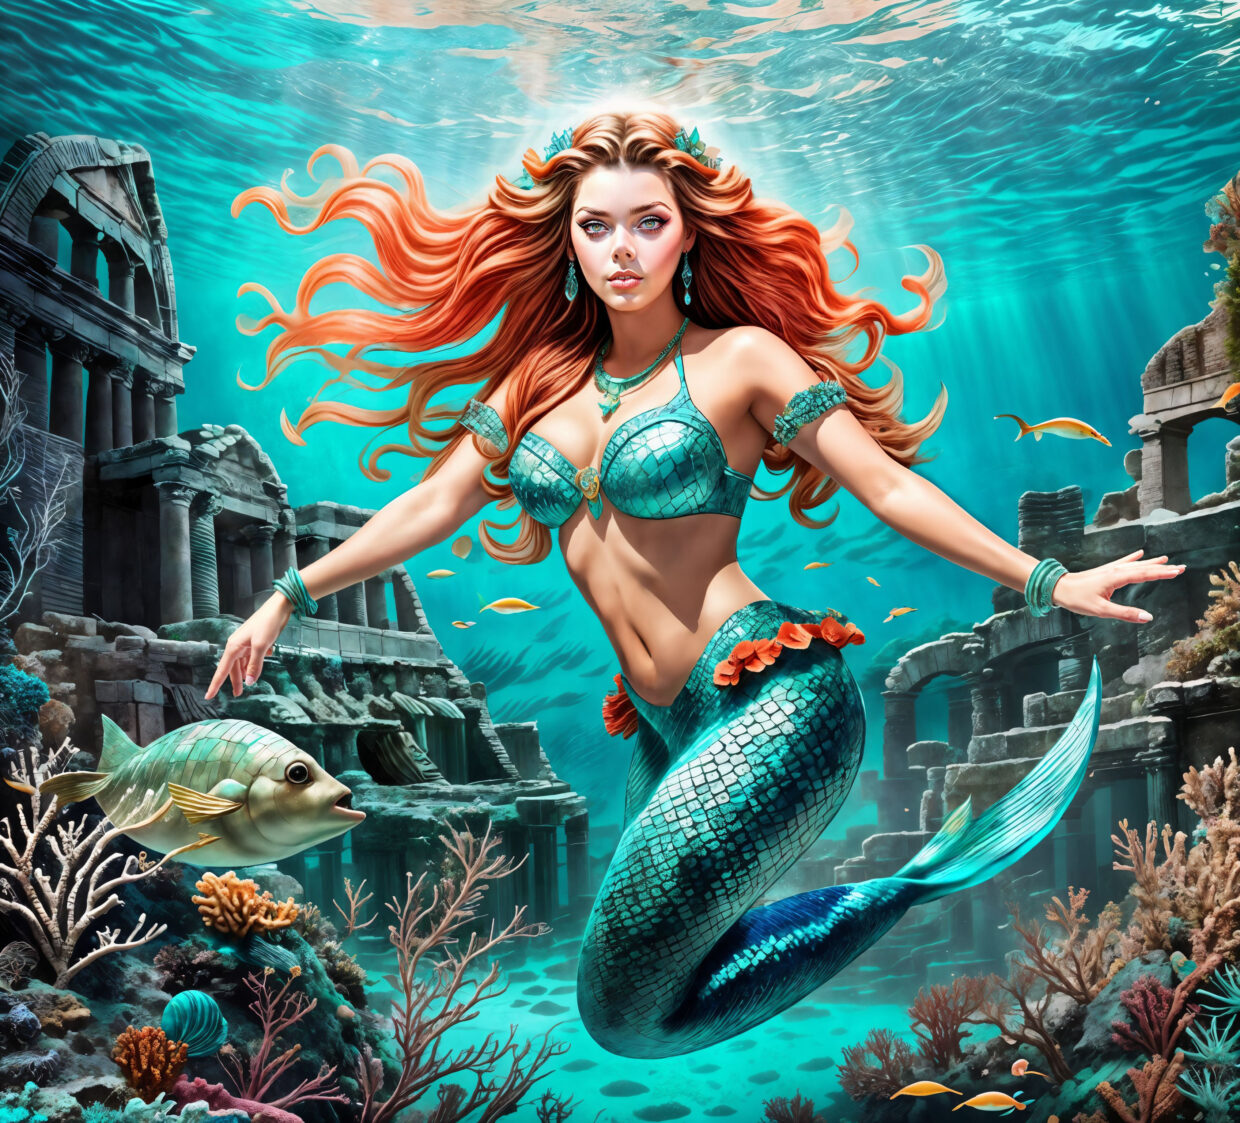 An enchanting image of a mermaid swimming amidst the ruins of Atlantis, created using artificial intelligence.